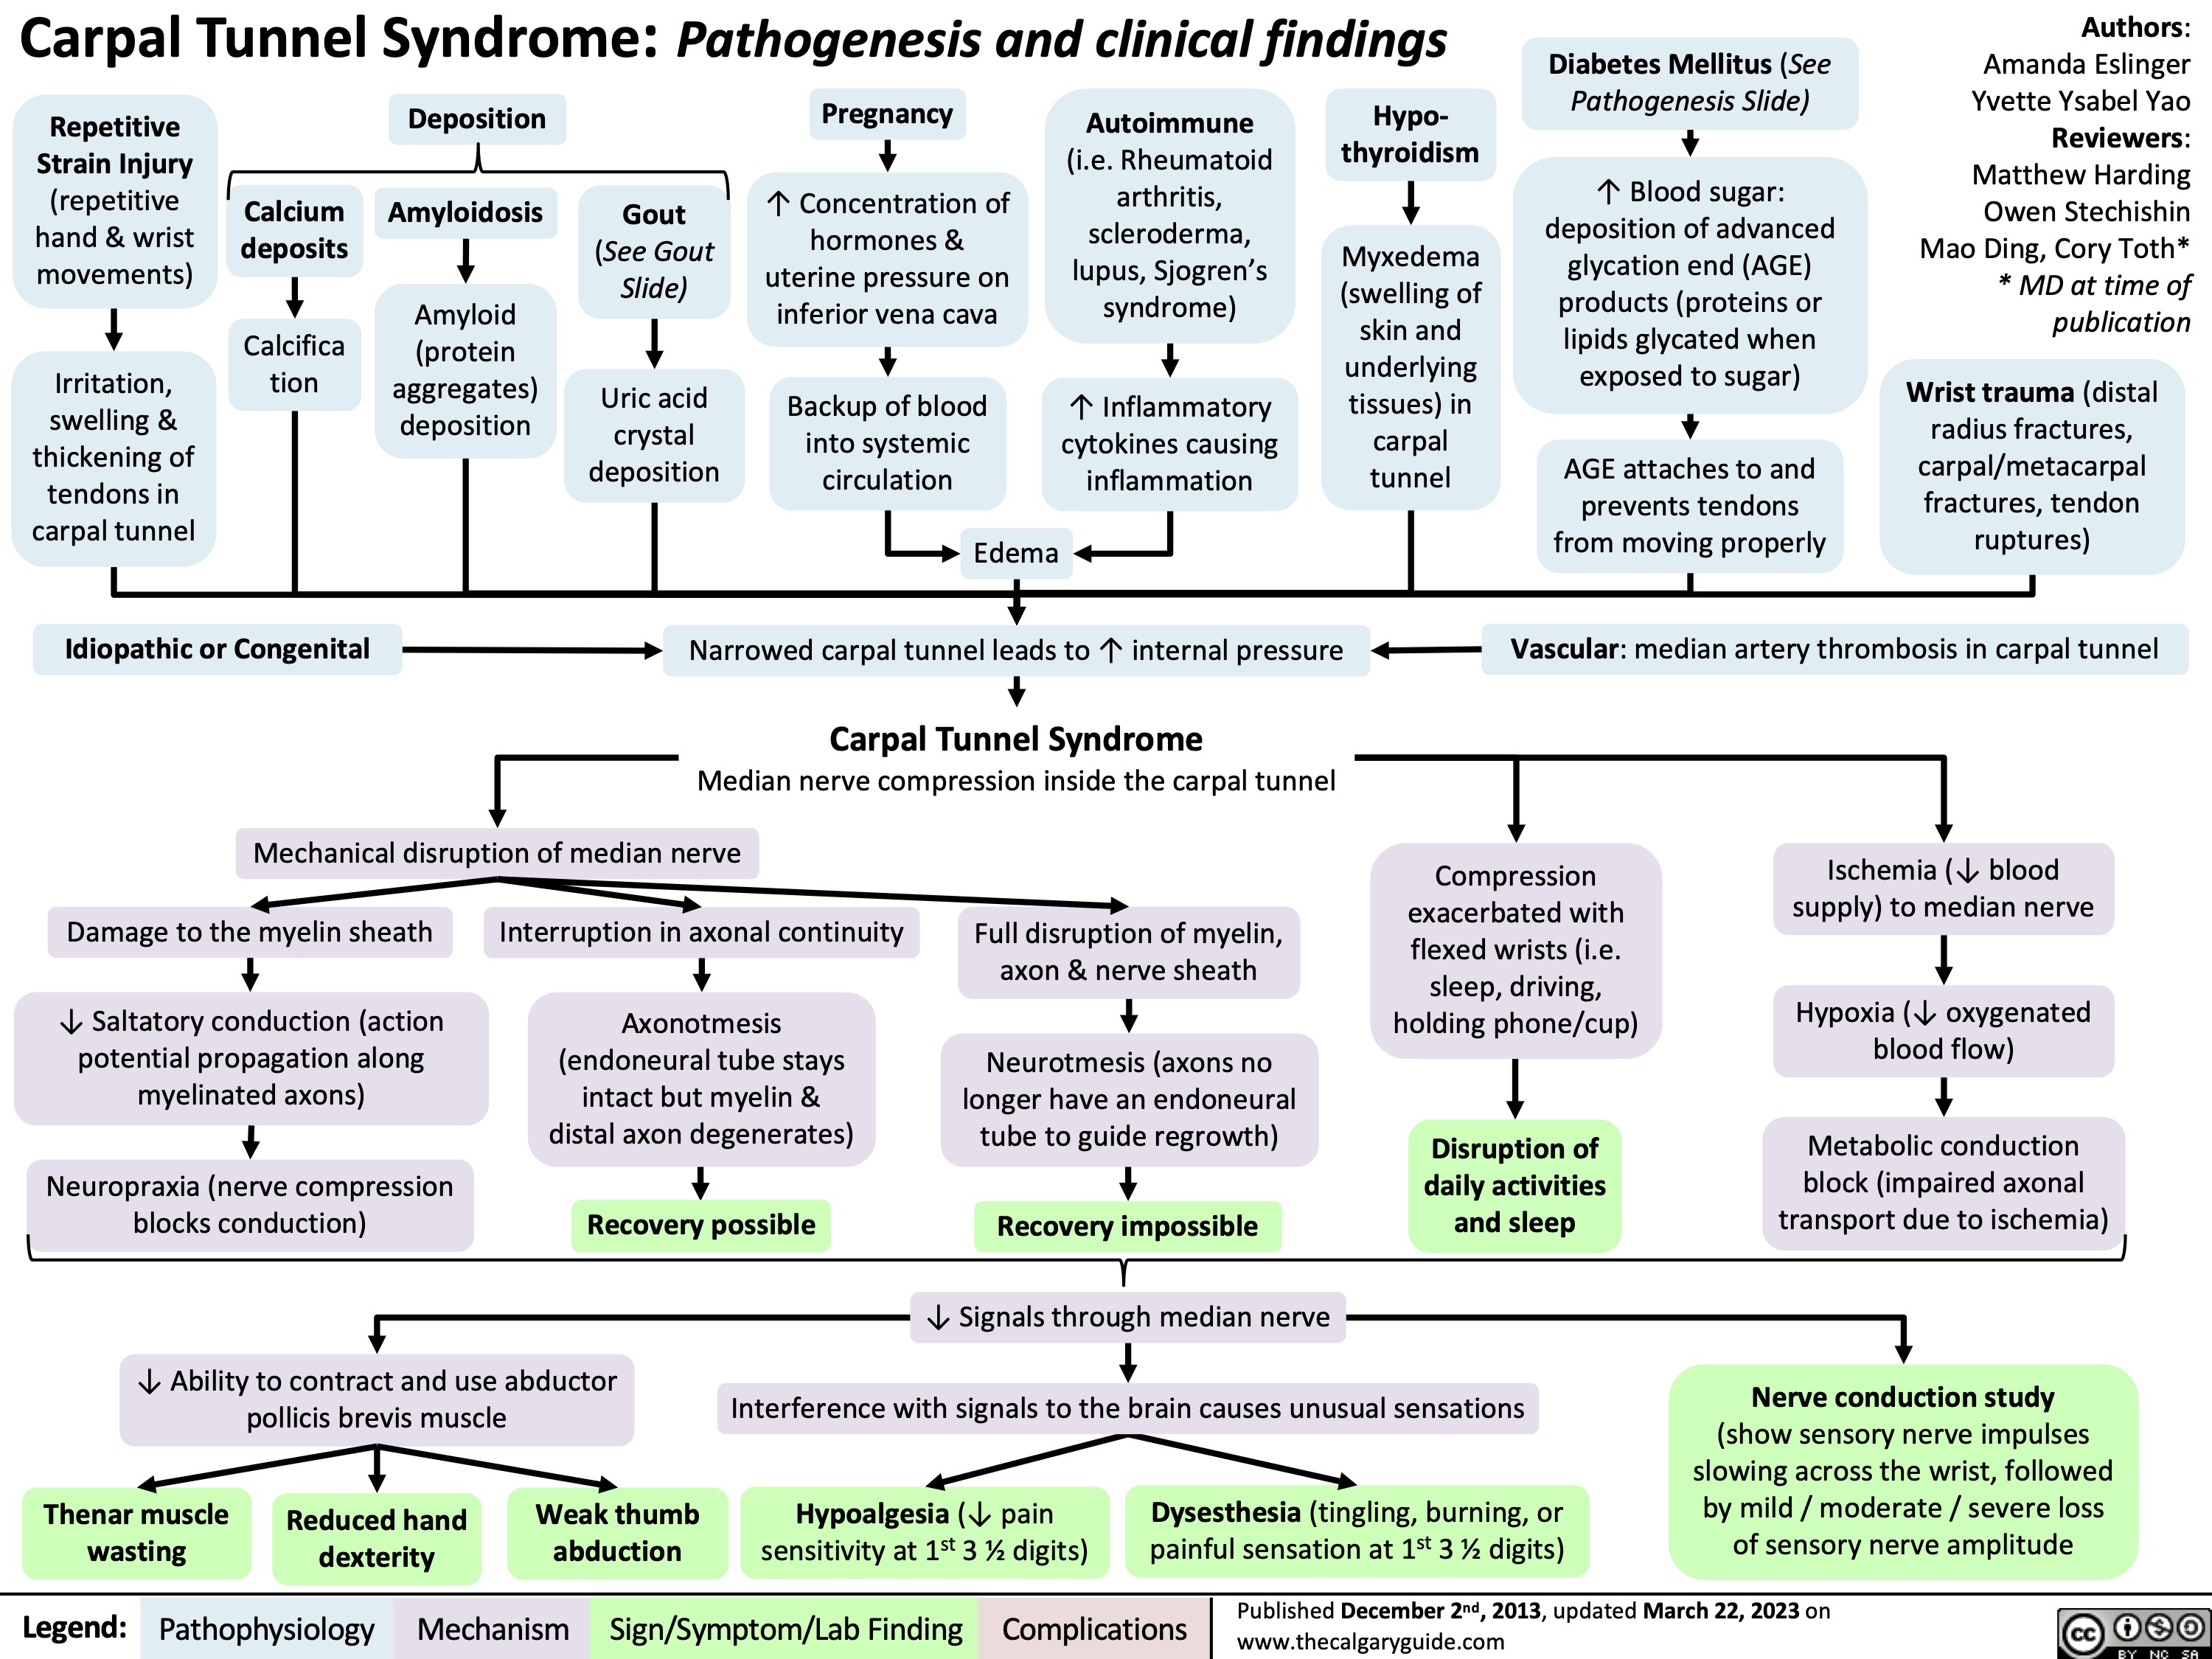 Carpal Tunnel Syndrome: Pathogenesis and clinical findings
Diabetes Mellitus (See Pathogenesis Slide)
↑ Blood sugar: deposition of advanced glycation end (AGE) products (proteins or lipids glycated when exposed to sugar)
AGE attaches to and prevents tendons from moving properly
Authors: Amanda Eslinger Yvette Ysabel Yao Reviewers: Matthew Harding Owen Stechishin Mao Ding, Cory Toth* * MD at time of publication
Wrist trauma (distal radius fractures, carpal/metacarpal fractures, tendon ruptures)
      Repetitive Strain Injury (repetitive hand & wrist movements)
Irritation, swelling & thickening of tendons in carpal tunnel
Calcium deposits
Calcifica tion
Deposition Amyloidosis
Amyloid
(protein aggregates) deposition
Gout
(See Gout Slide)
Uric acid crystal deposition
Pregnancy
↑ Concentration of hormones & uterine pressure on inferior vena cava
Backup of blood into systemic circulation
Autoimmune
(i.e. Rheumatoid arthritis, scleroderma, lupus, Sjogren’s syndrome)
↑ Inflammatory cytokines causing inflammation
Hypo- thyroidism
Myxedema (swelling of skin and underlying tissues) in carpal tunnel
                      Idiopathic or Congenital
Edema
Narrowed carpal tunnel leads to ↑ internal pressure
Carpal Tunnel Syndrome
Vascular: median artery thrombosis in carpal tunnel
    Median nerve compression inside the carpal tunnel Mechanical disruption of median nerve
Compression exacerbated with flexed wrists (i.e. sleep, driving, holding phone/cup)
Disruption of daily activities and sleep
Ischemia (↓ blood supply) to median nerve
Hypoxia (↓ oxygenated blood flow)
Metabolic conduction block (impaired axonal transport due to ischemia)
Nerve conduction study
(show sensory nerve impulses slowing across the wrist, followed by mild / moderate / severe loss of sensory nerve amplitude
       Damage to the myelin sheath
↓ Saltatory conduction (action potential propagation along myelinated axons)
Neuropraxia (nerve compression blocks conduction)
Interruption in axonal continuity
Axonotmesis (endoneural tube stays intact but myelin & distal axon degenerates)
Recovery possible
Full disruption of myelin, axon & nerve sheath
Neurotmesis (axons no longer have an endoneural tube to guide regrowth)
Recovery impossible
               ↓ Ability to contract and use abductor pollicis brevis muscle
↓ Signals through median nerve
Interference with signals to the brain causes unusual sensations
Hypoalgesia (↓ pain Dysesthesia (tingling, burning, or sensitivity at 1st 3 1⁄2 digits) painful sensation at 1st 3 1⁄2 digits)
           Thenar muscle wasting
Reduced hand dexterity
Weak thumb abduction
 Legend:
 Pathophysiology
 Mechanism
Sign/Symptom/Lab Finding
 Complications
Published December 2nd, 2013, updated March 22, 2023 on www.thecalgaryguide.com
   